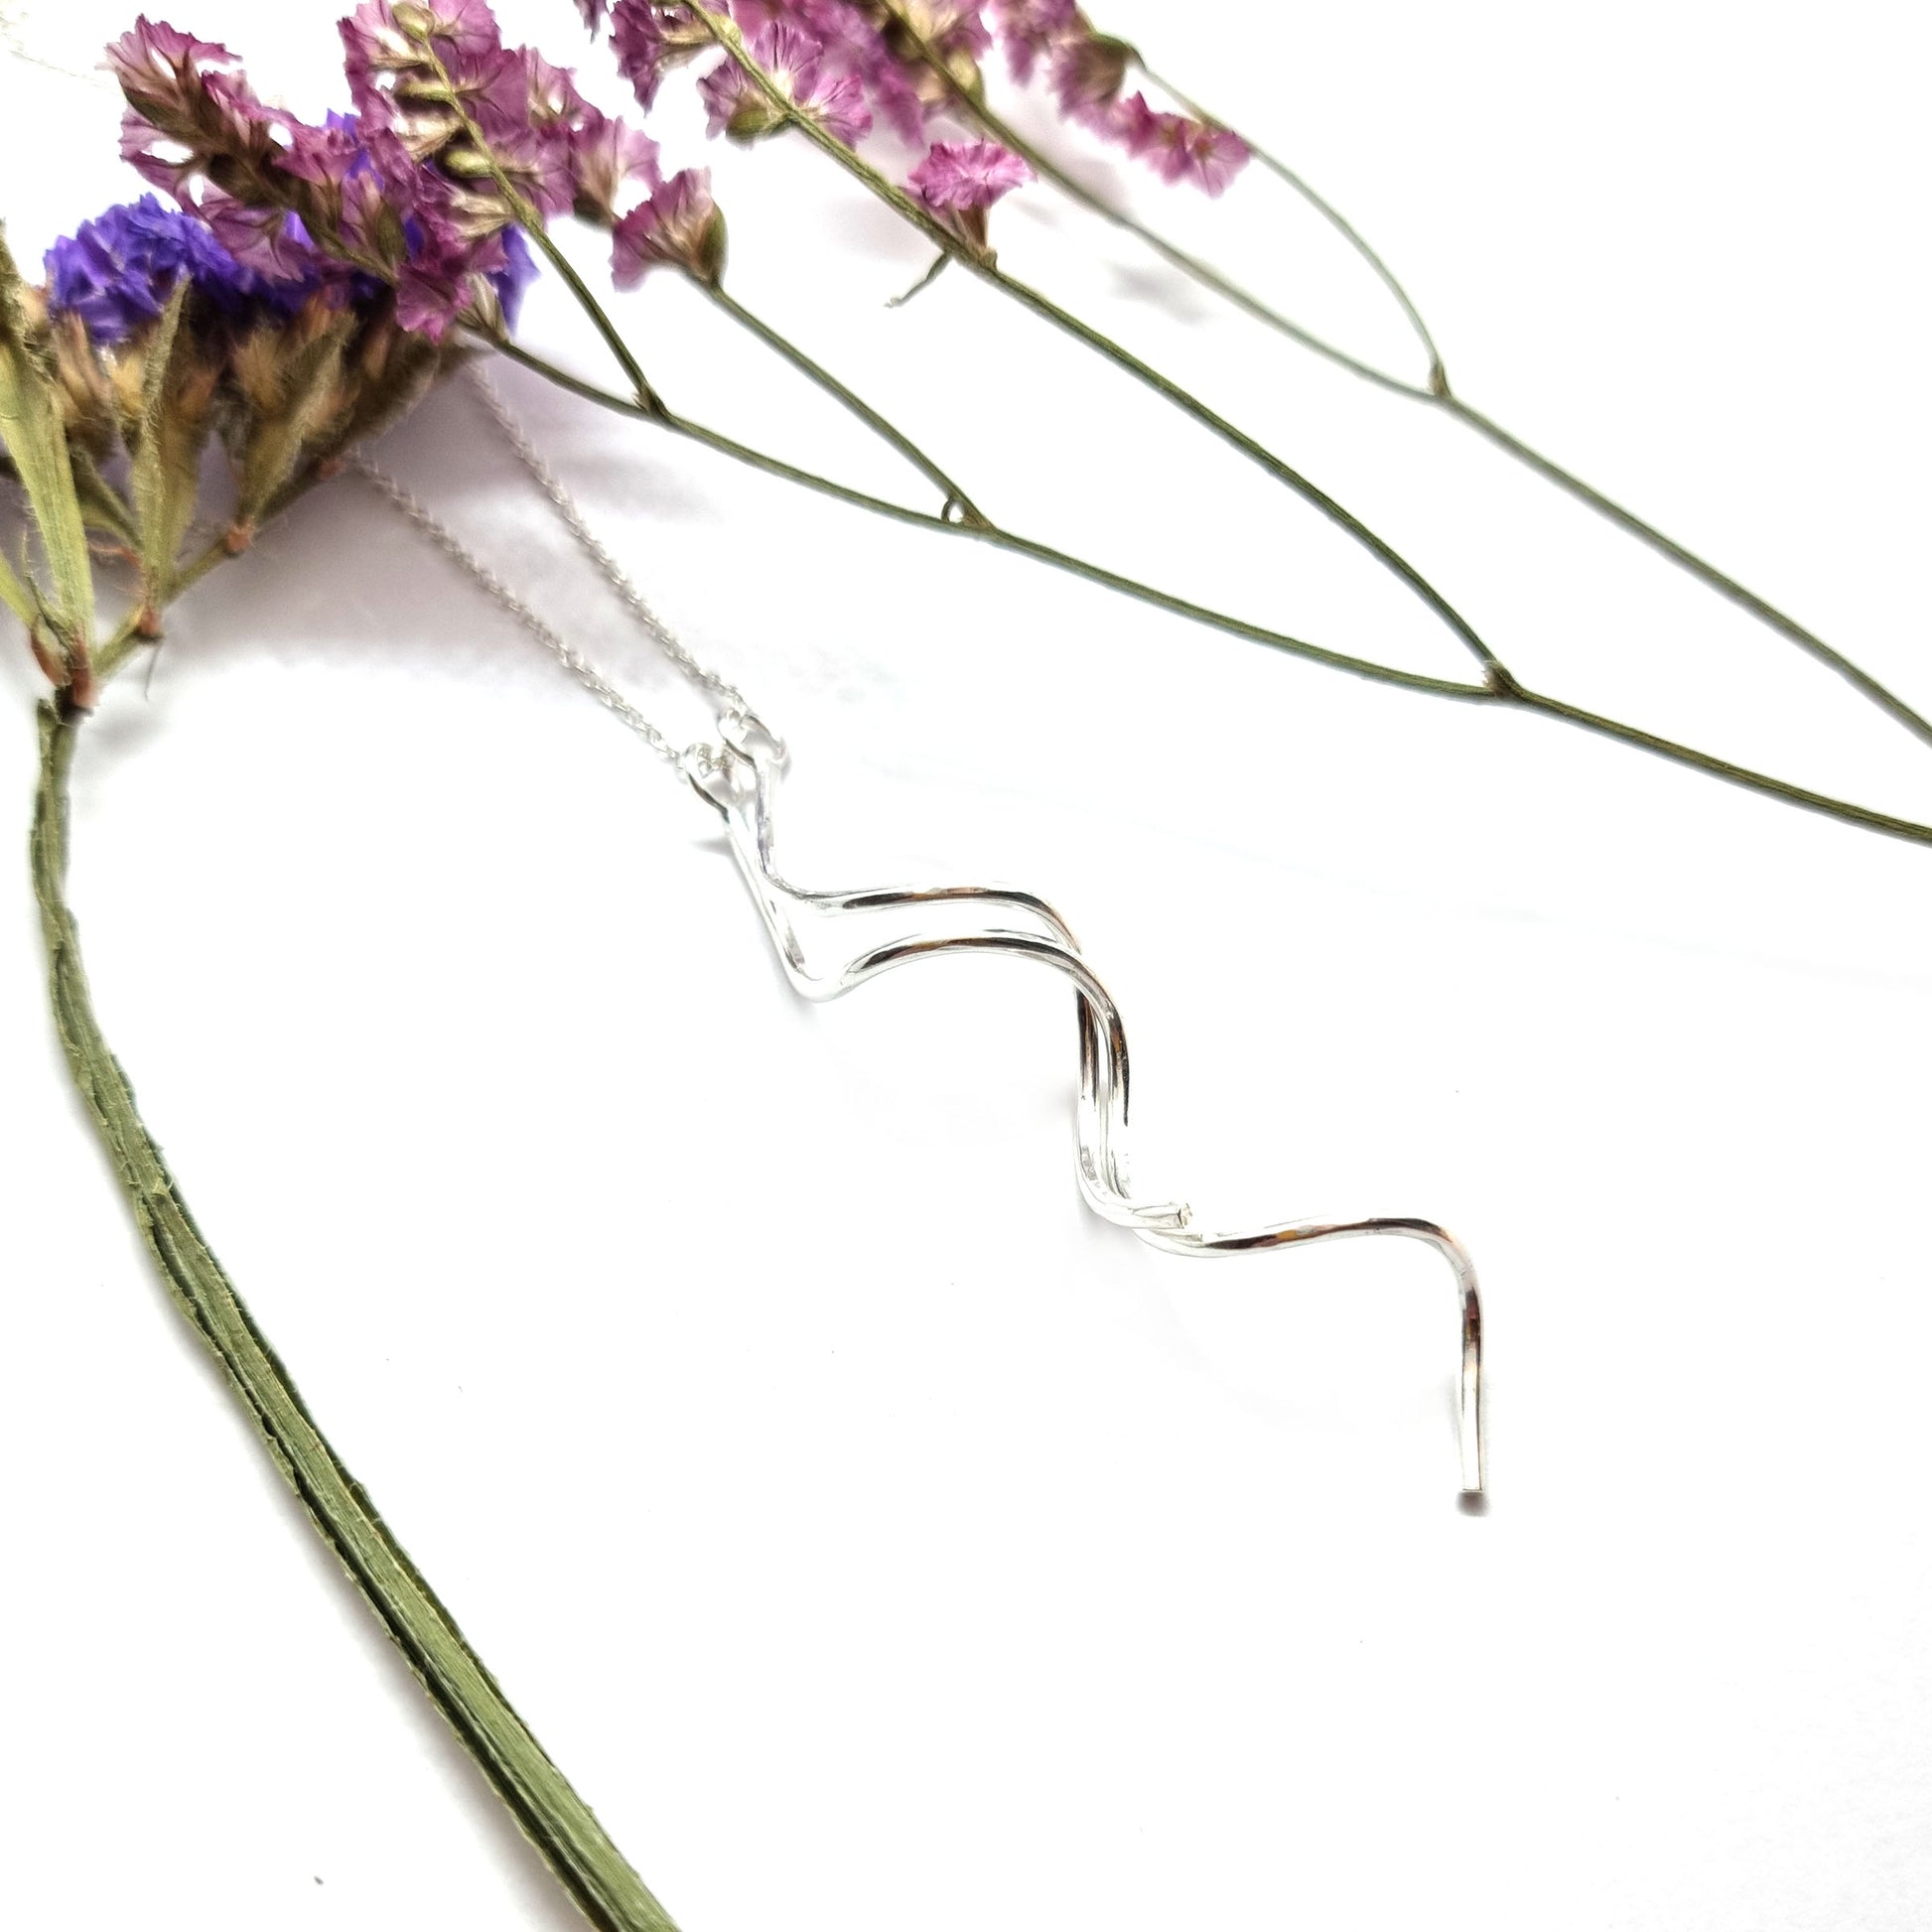 A silver spiral pendant with 2 strands intertwined suspended from a silver chain. Shown with flowers.